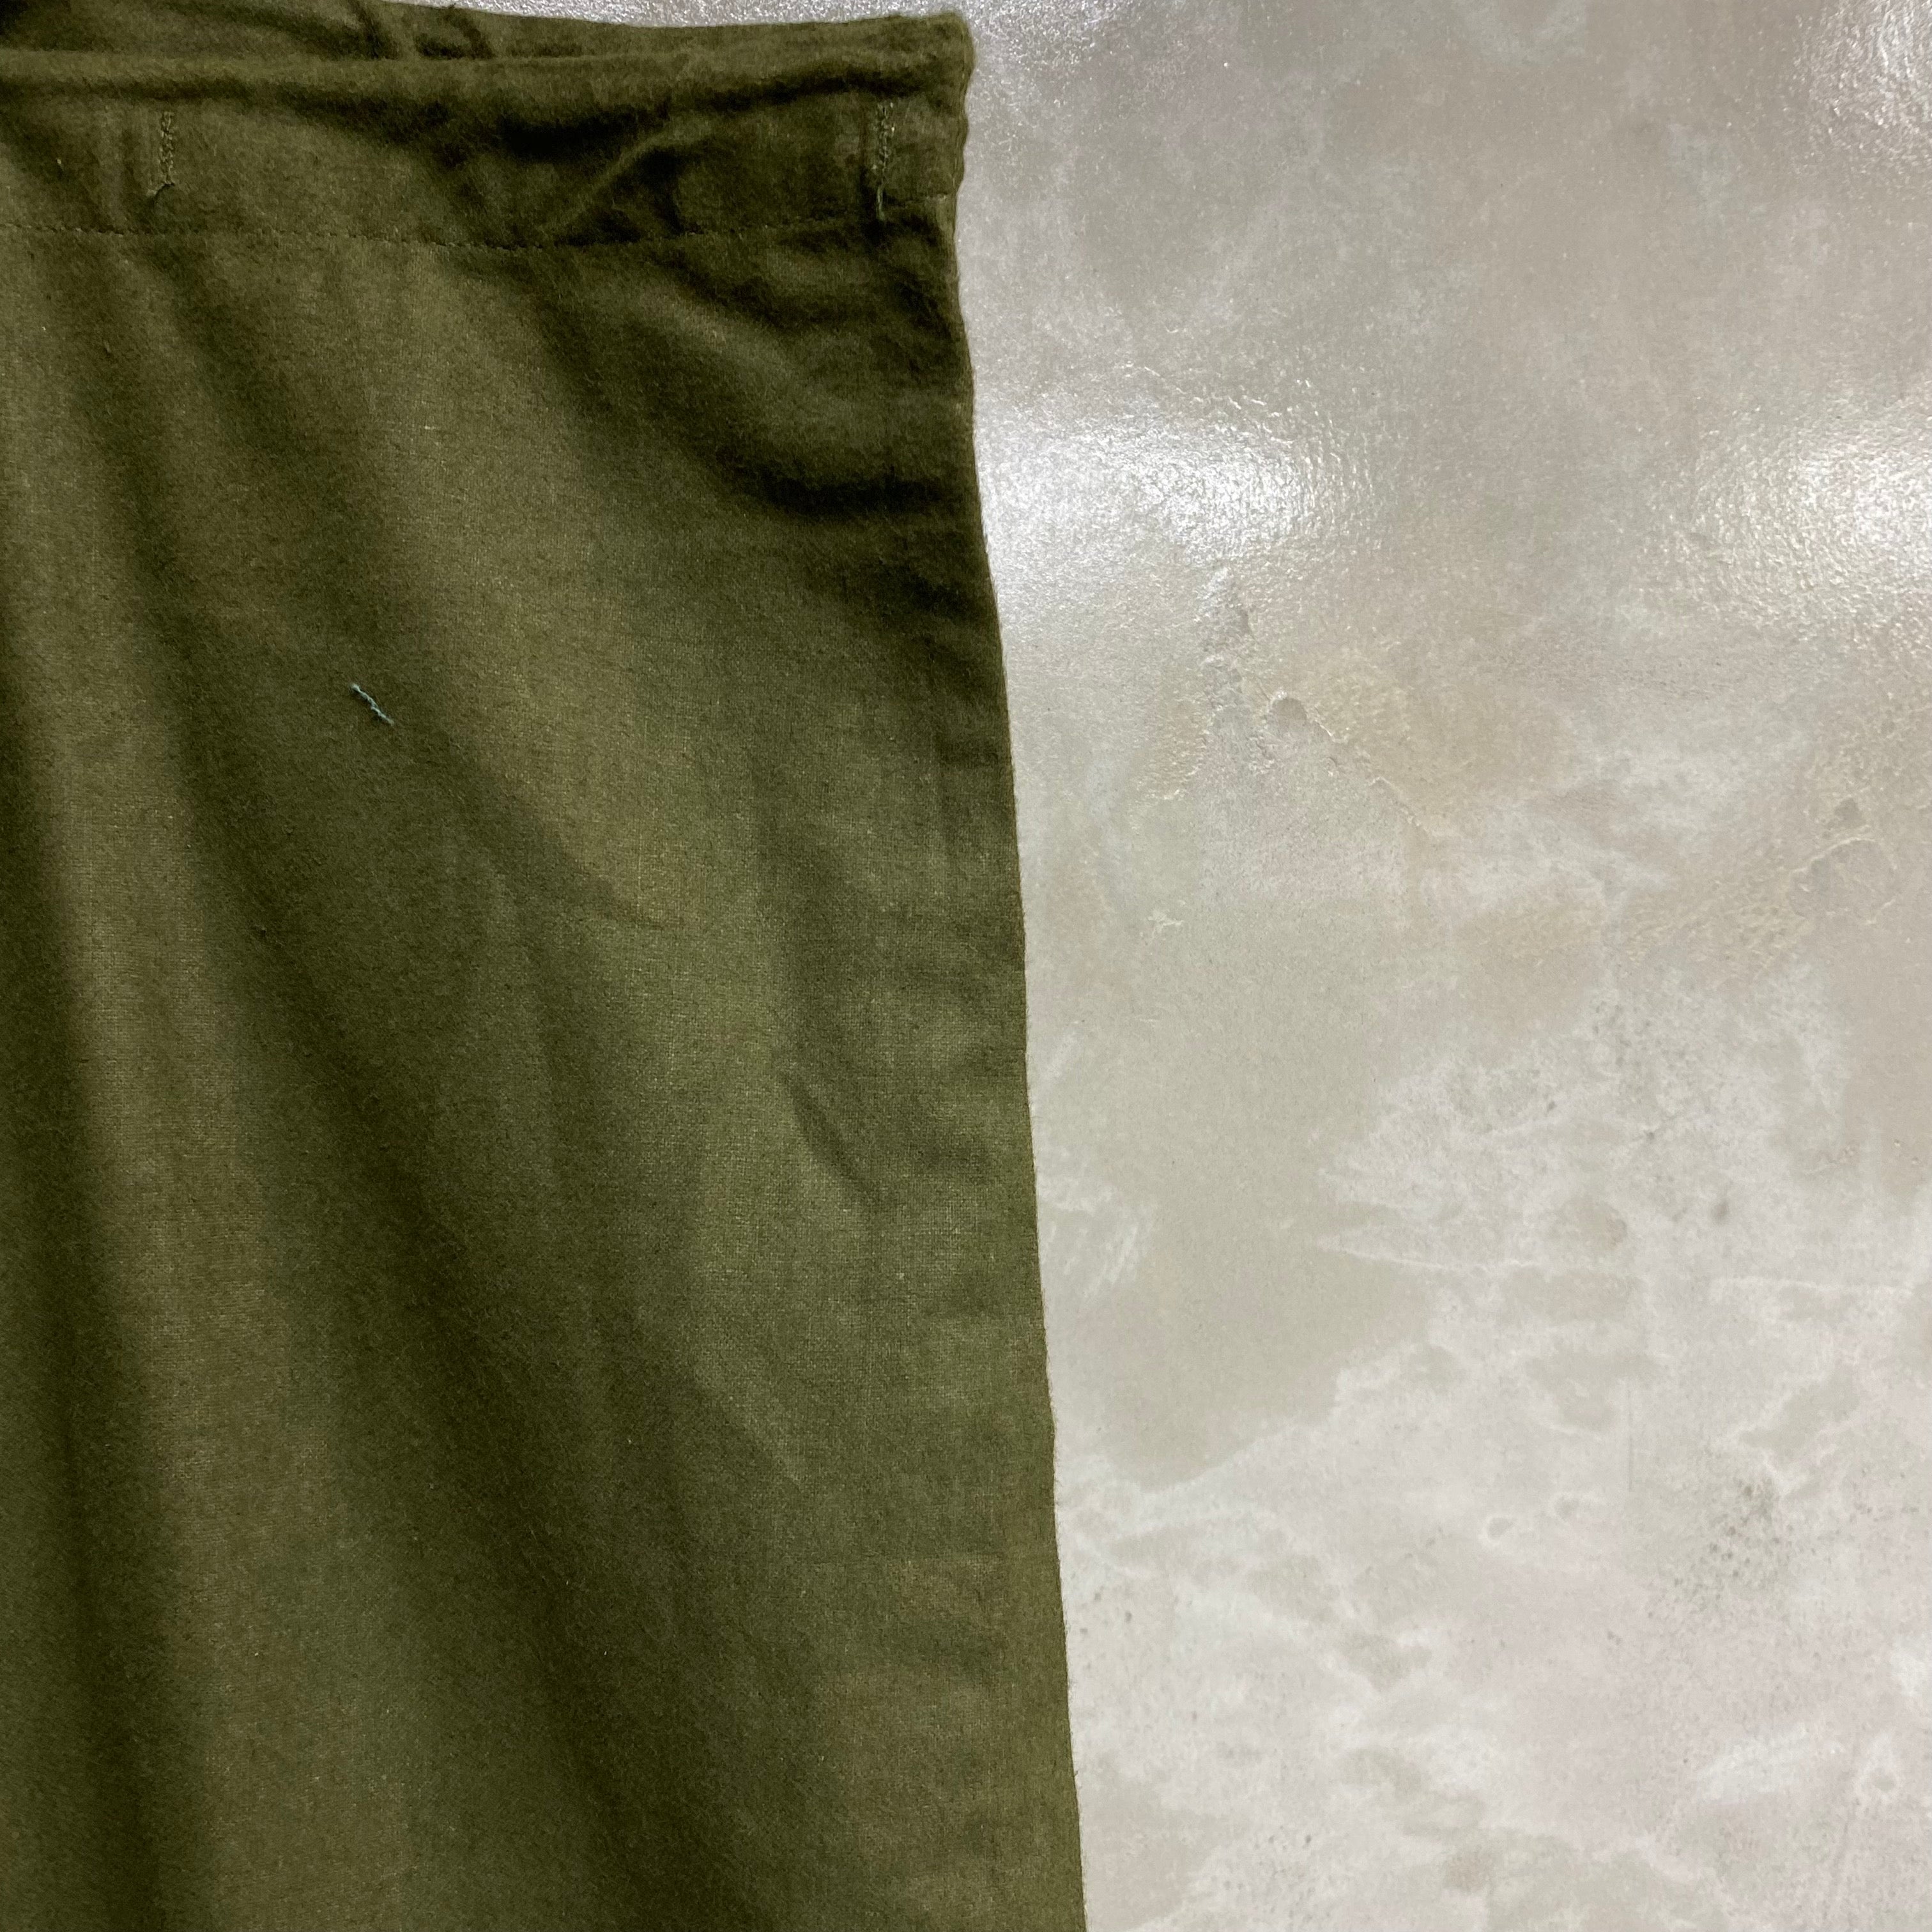 [ ONLY ONE ! ] U.S 64's GAS PROTECTIVE SHELL PANTS / U.S.MILITARY